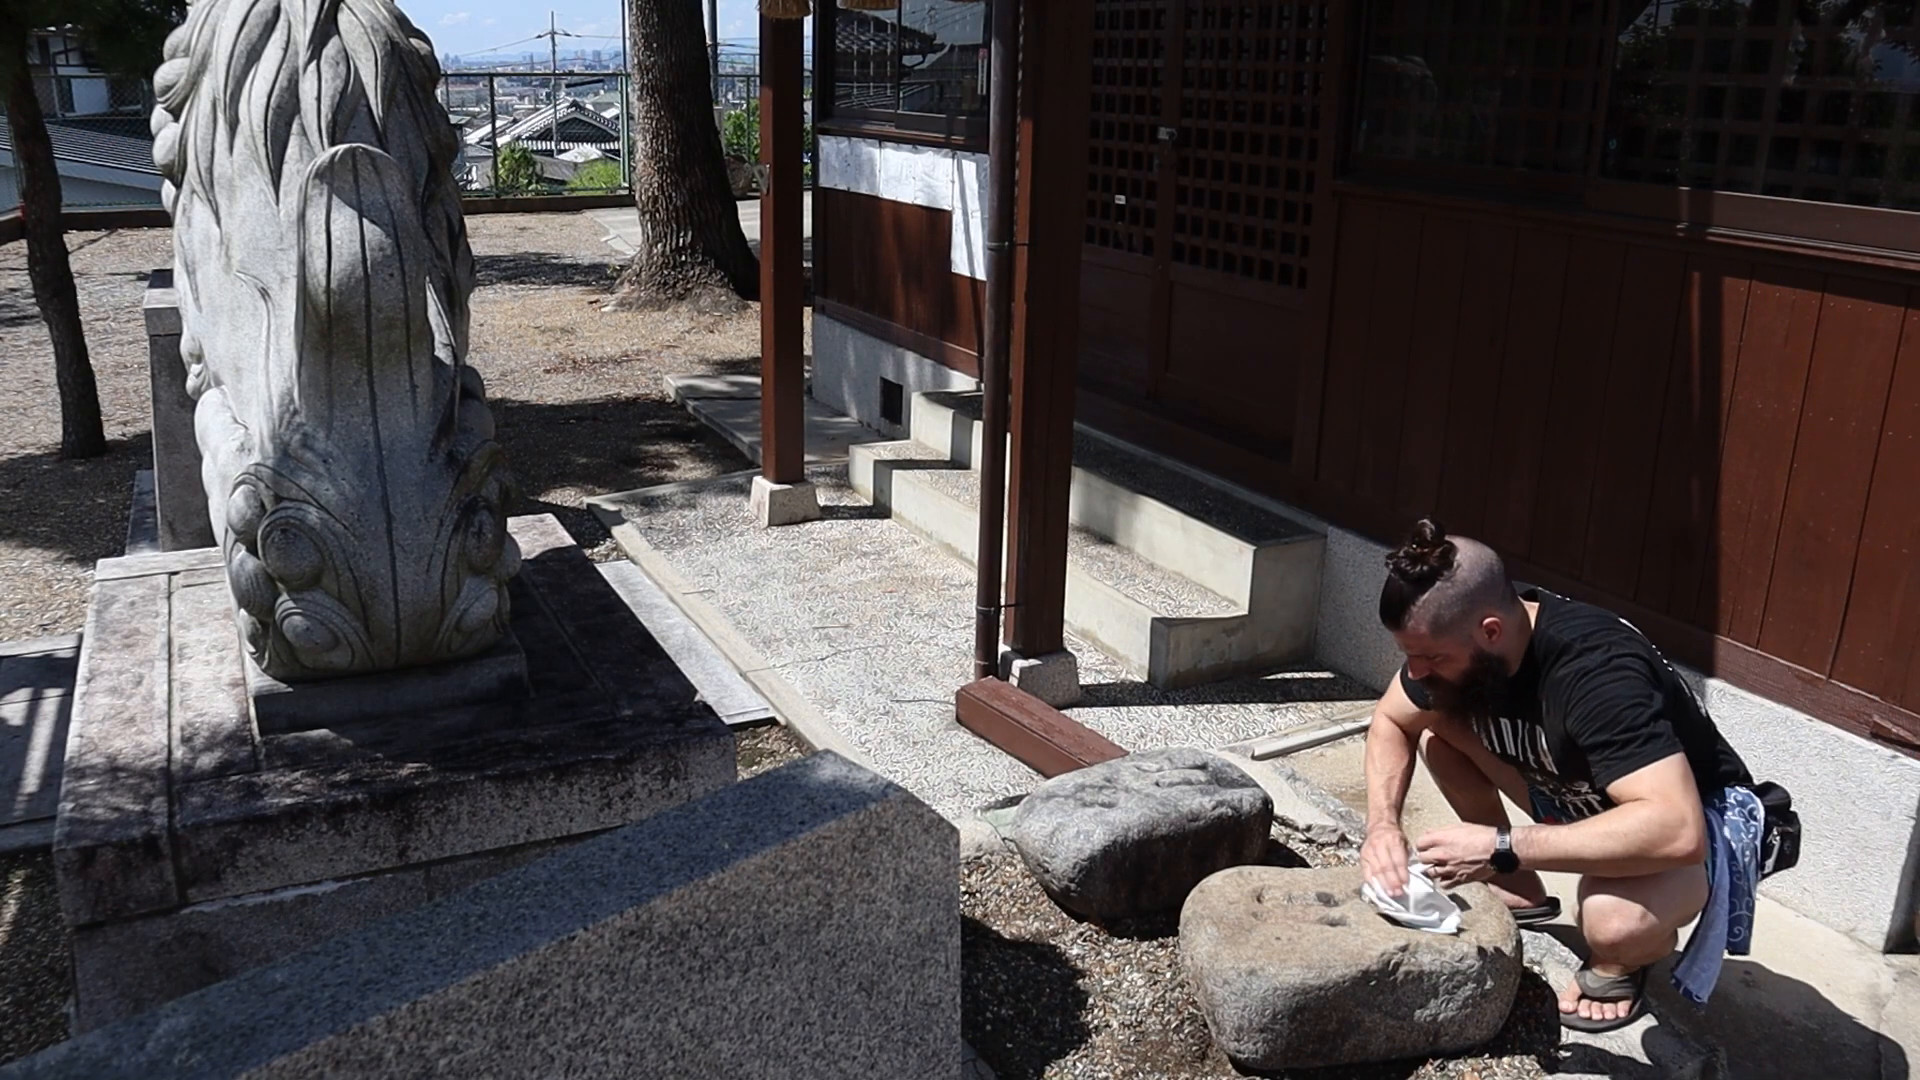 David 'Tamotsu' Dunlap cleans dirt from a stone.